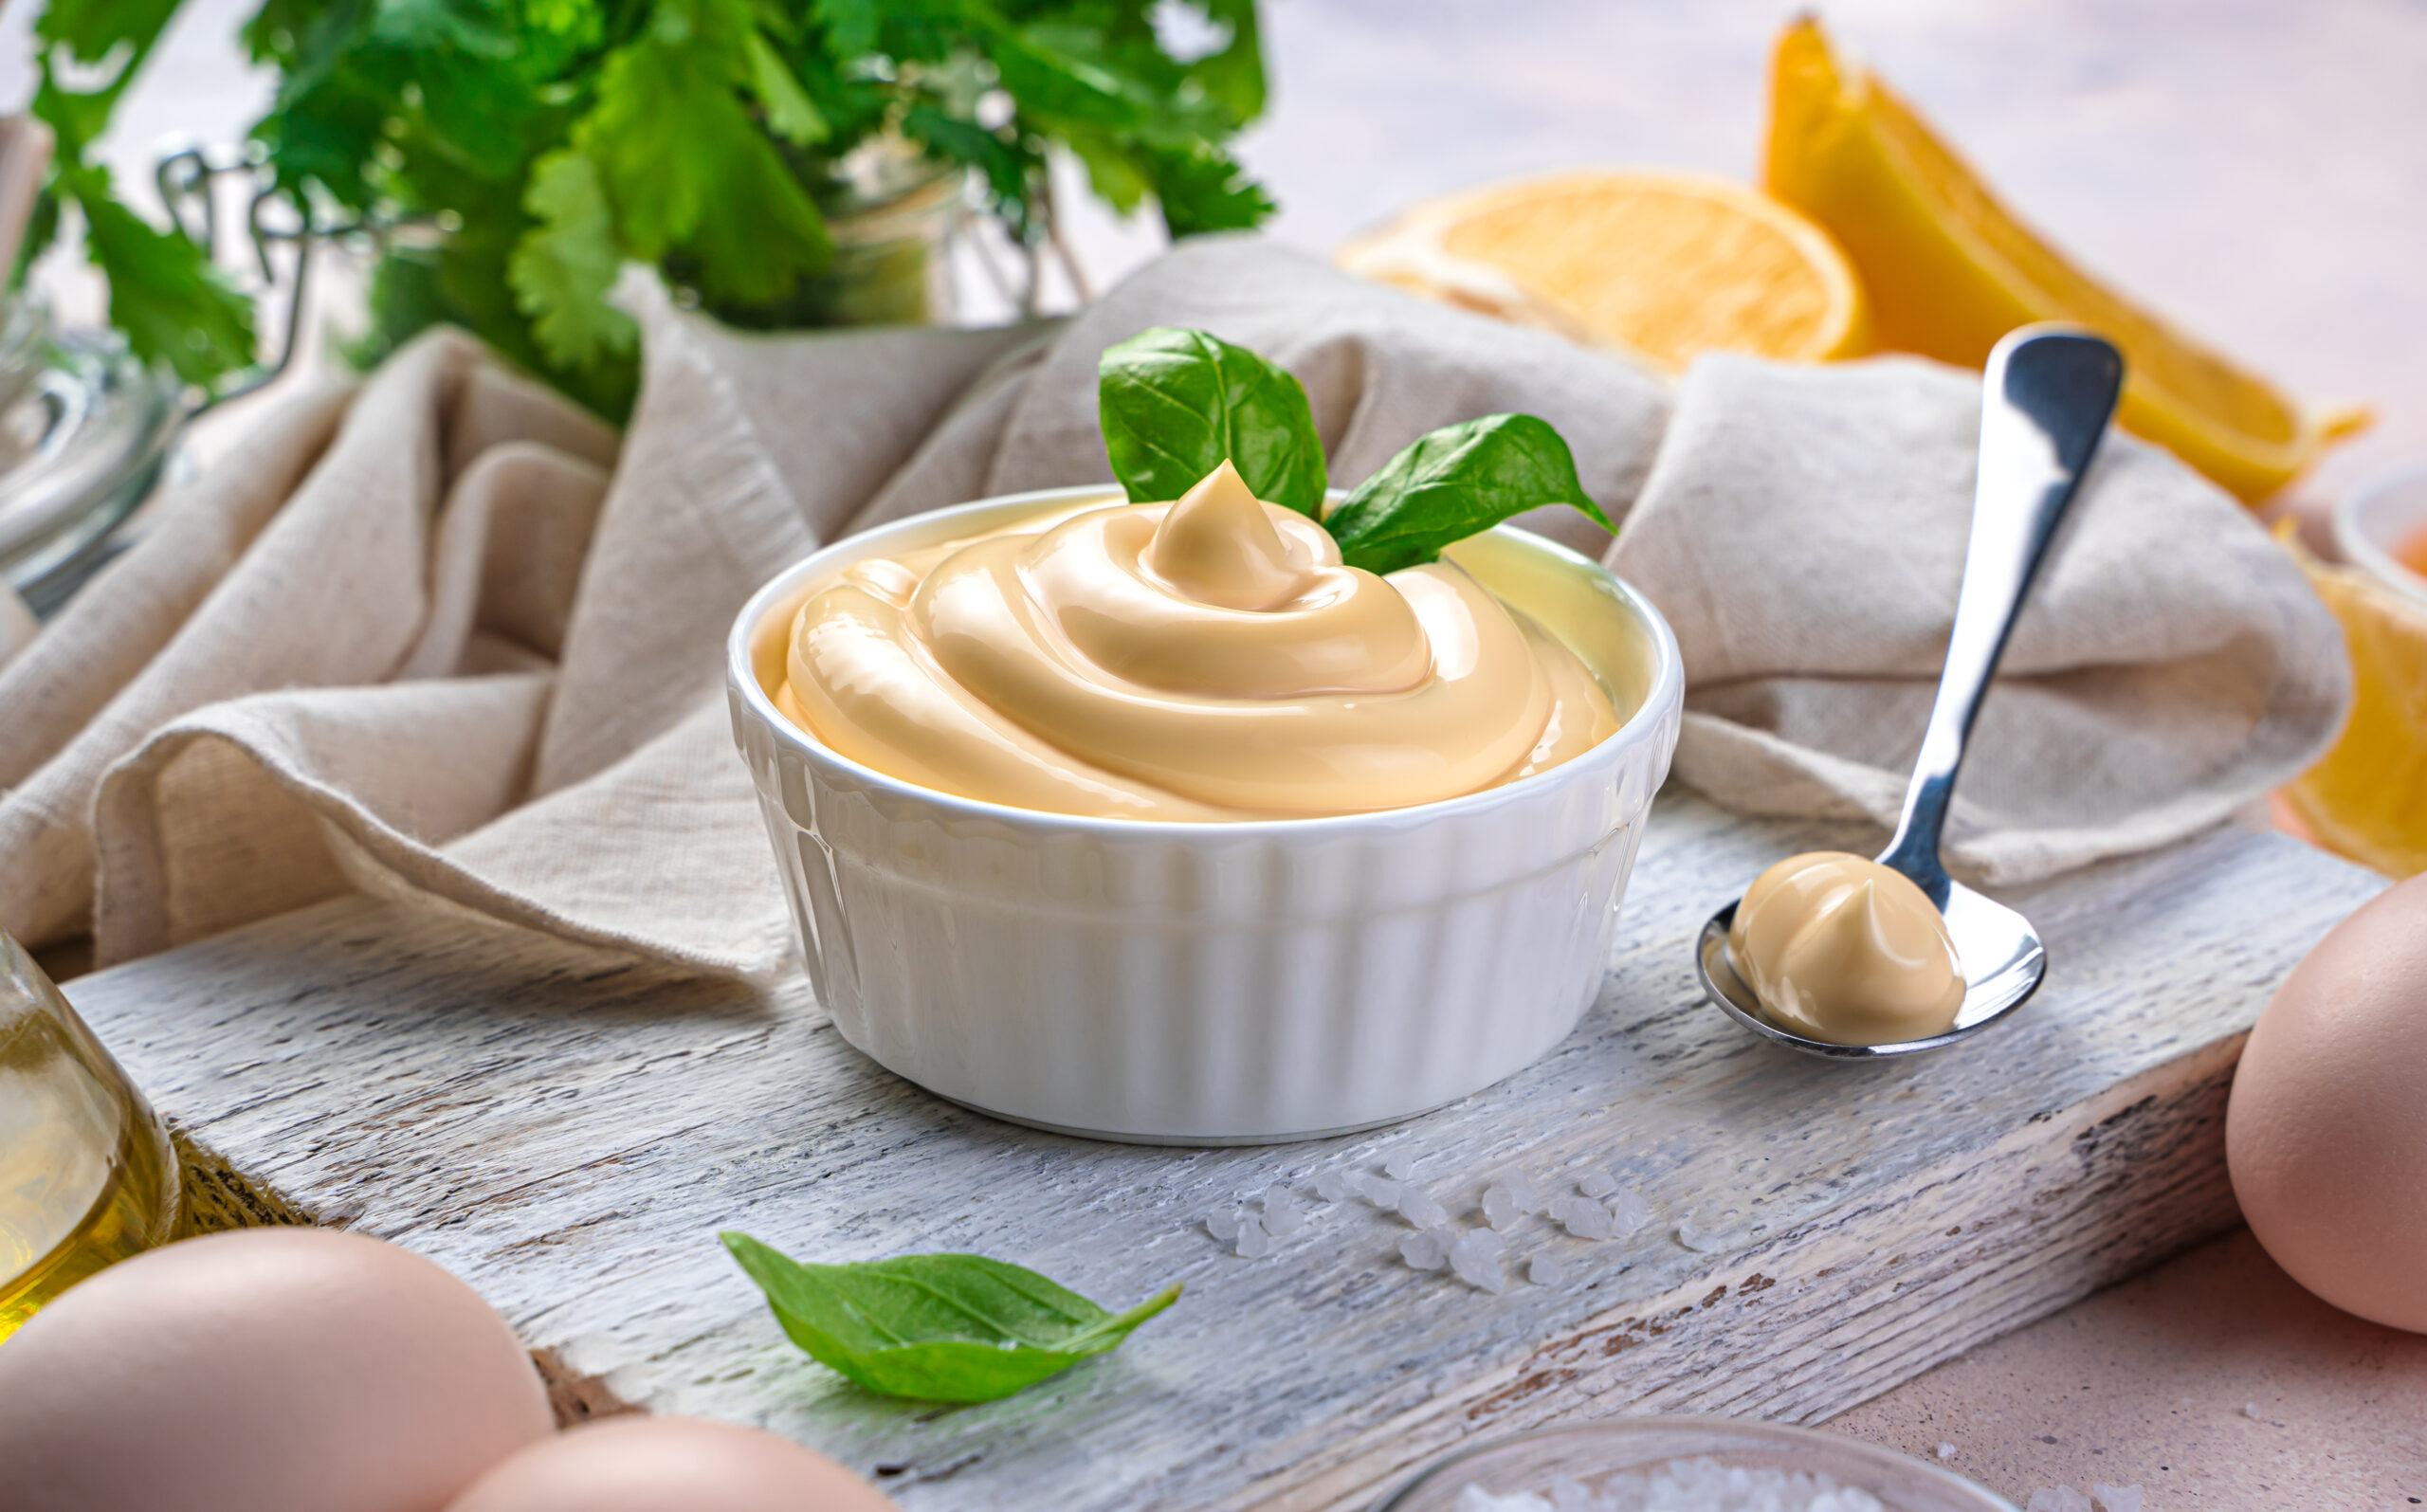 Make your own Homemade mayonnaise in just 5 mins